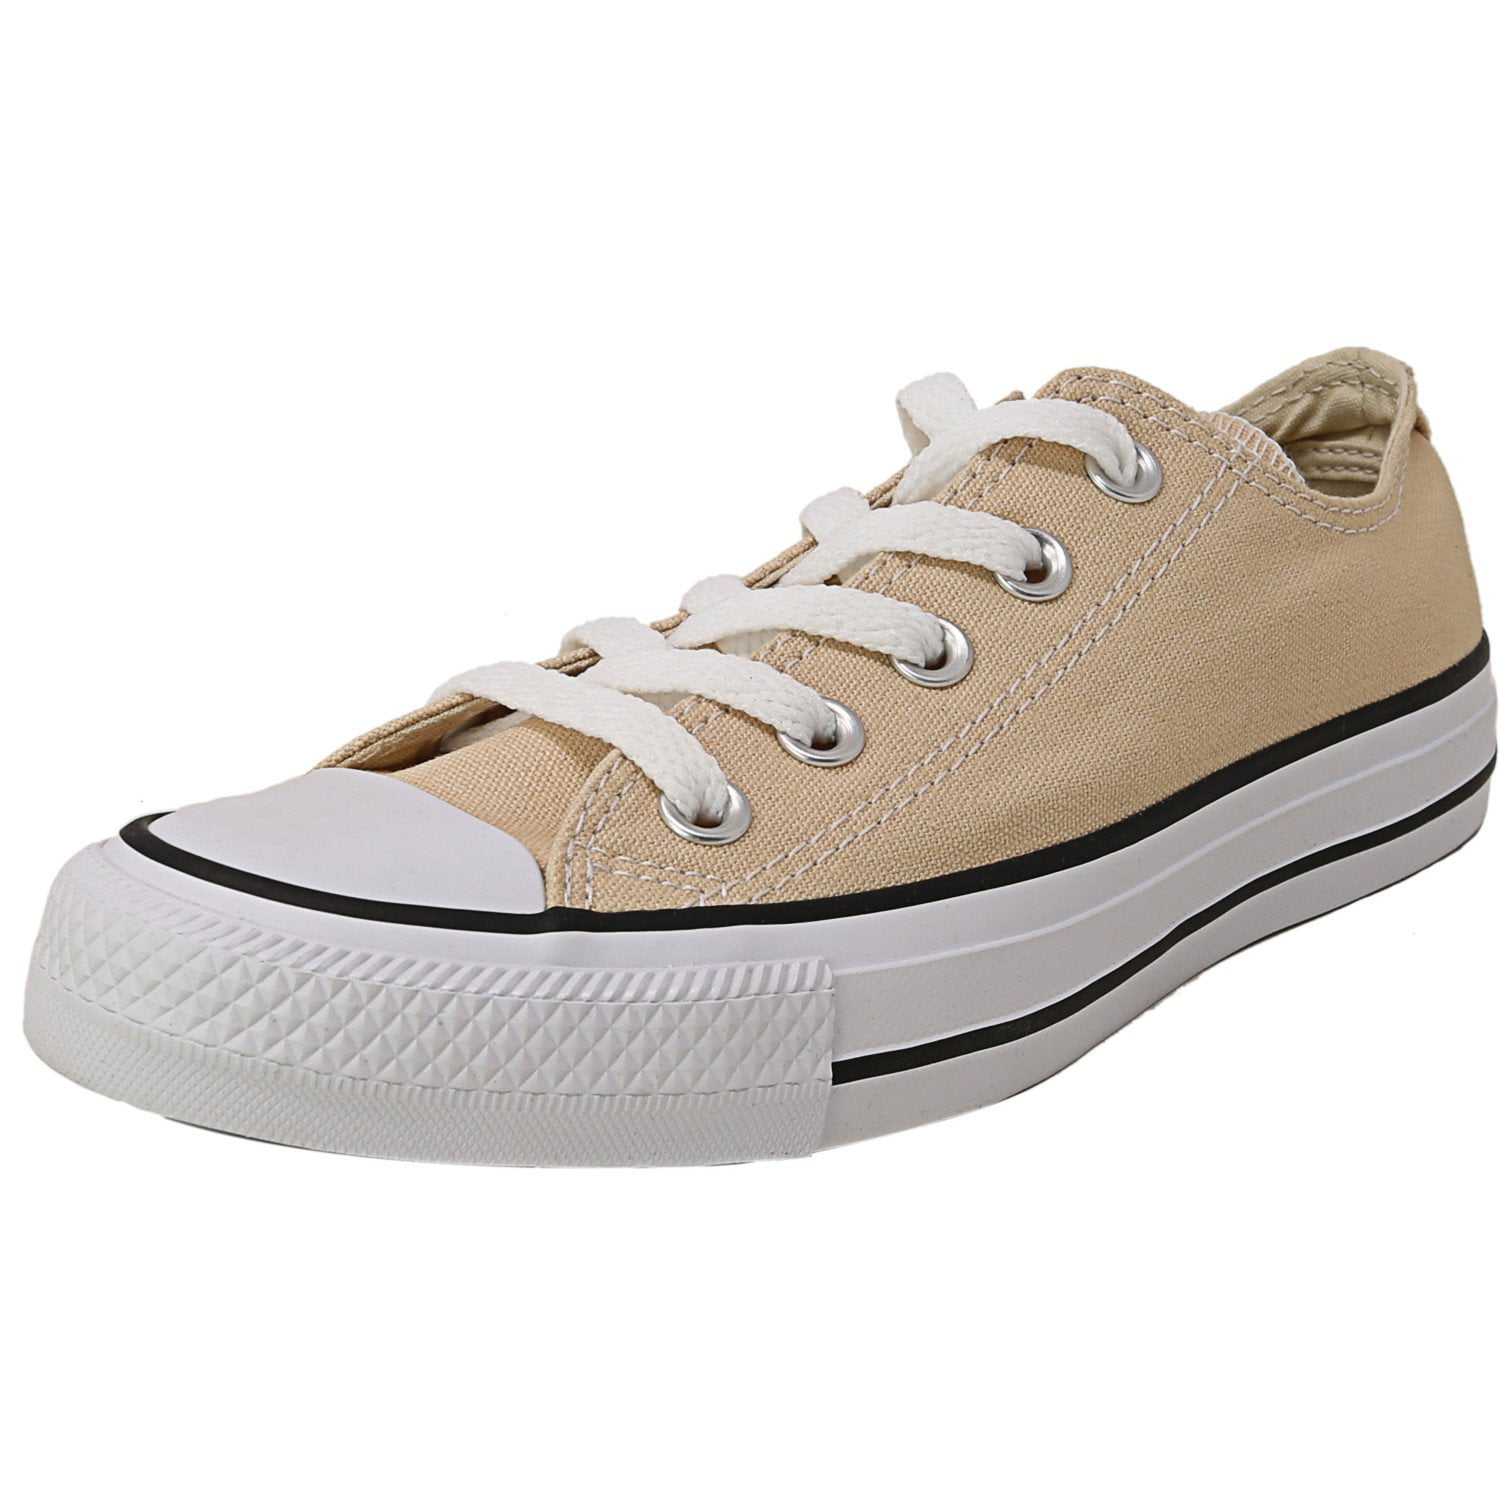 Duftende venlige uddybe Converse Chuck Taylor All Star Ox Raw Ginger Ankle-High Fashion Sneaker -  8M / 6M - Walmart.com